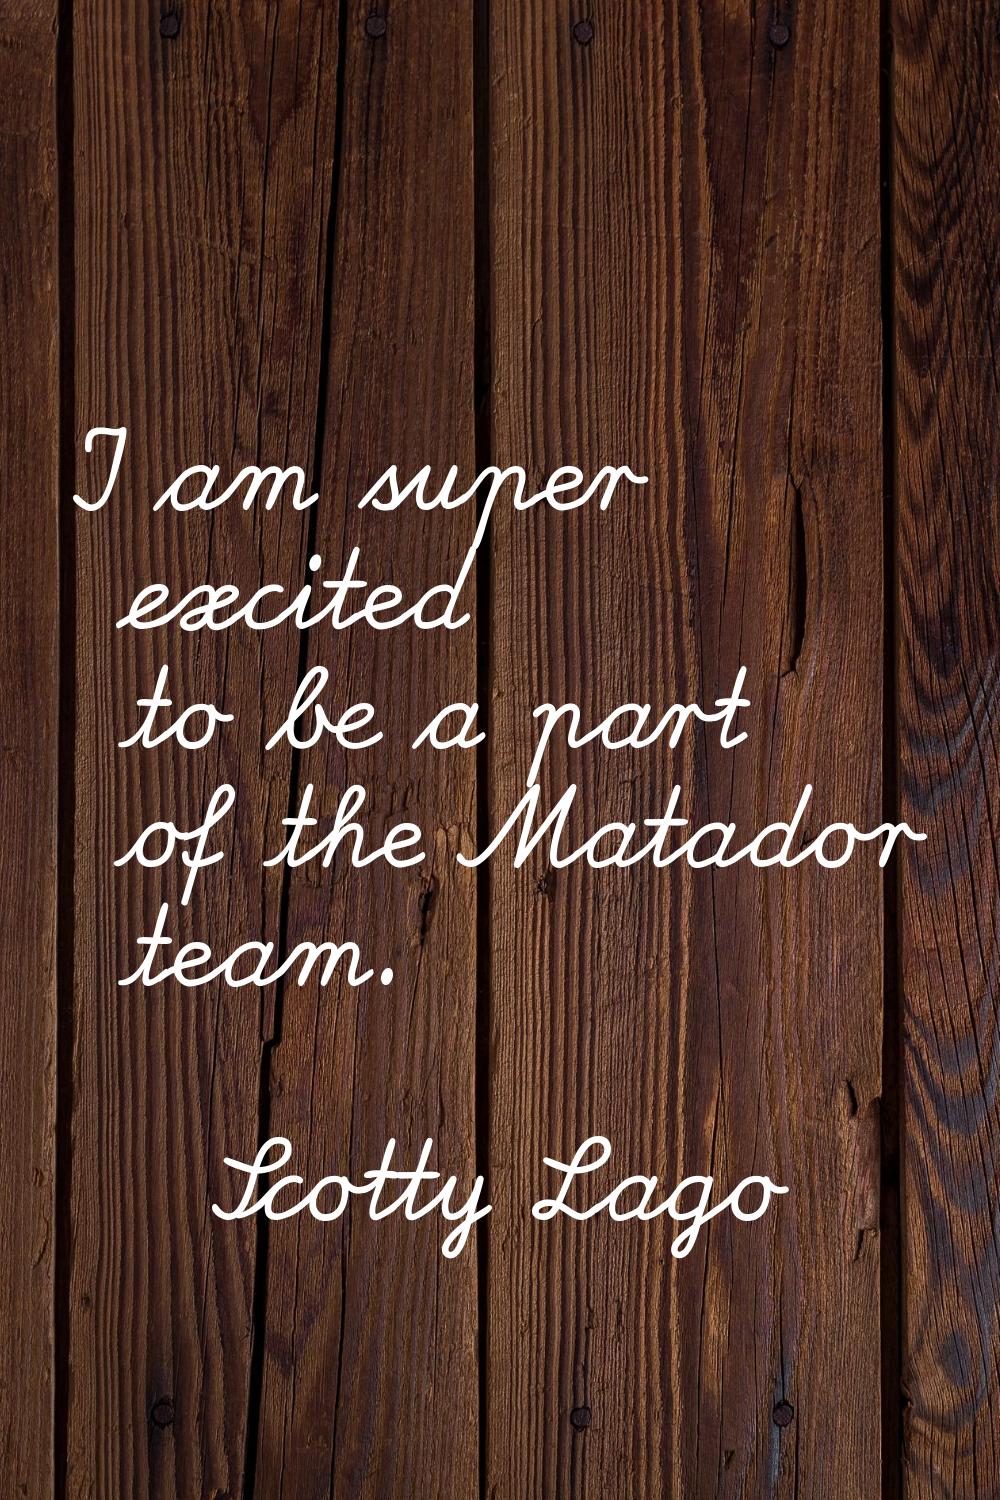 I am super excited to be a part of the Matador team.